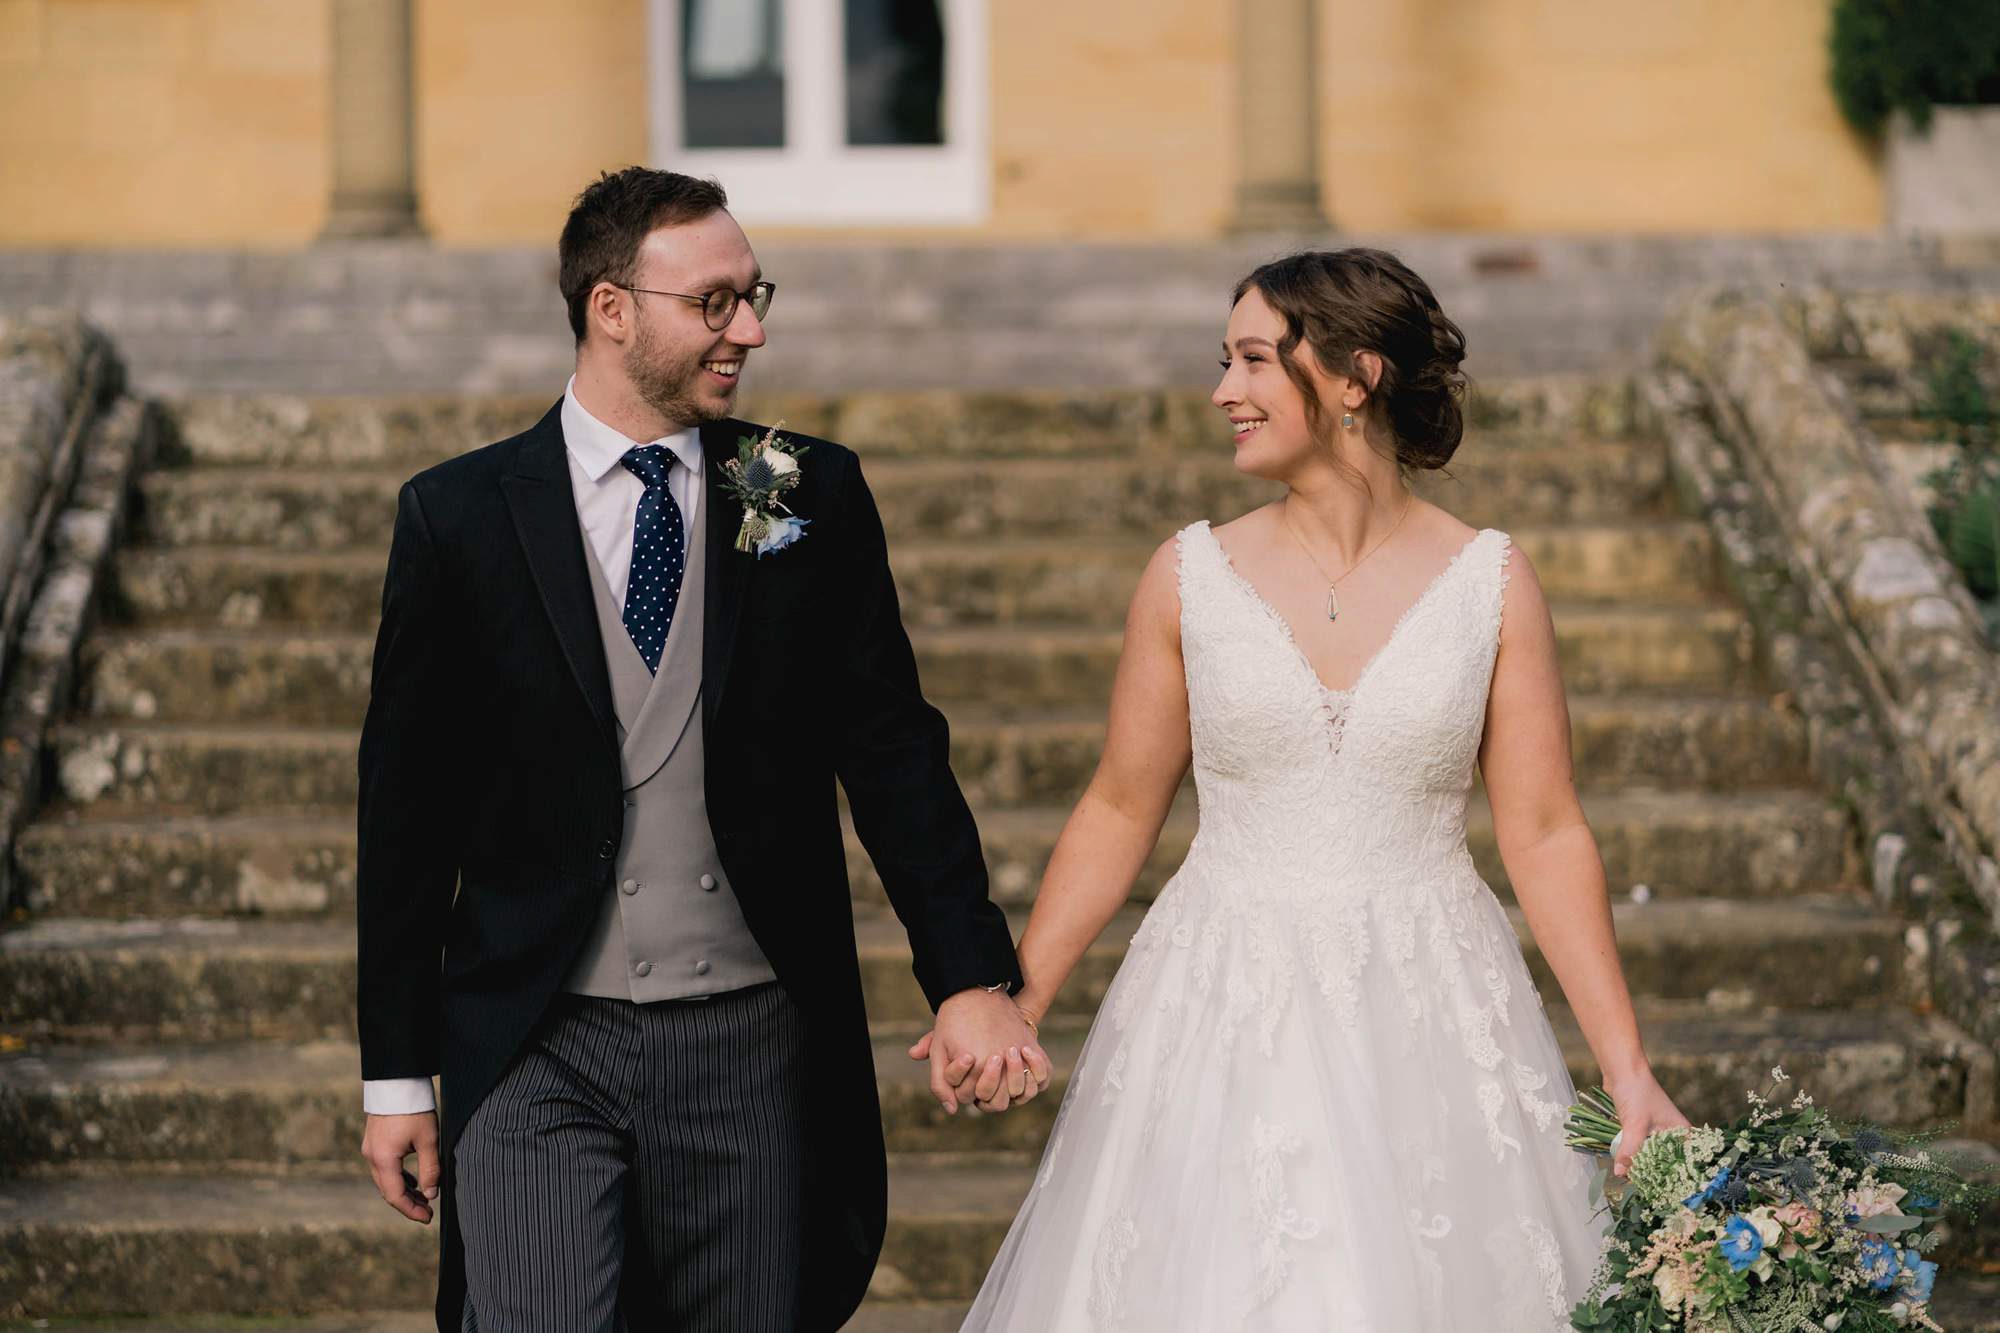 Bride and groom smiling whilst they take a stroll on their wedding day at Salomons Estate in Tunbridge Wells.